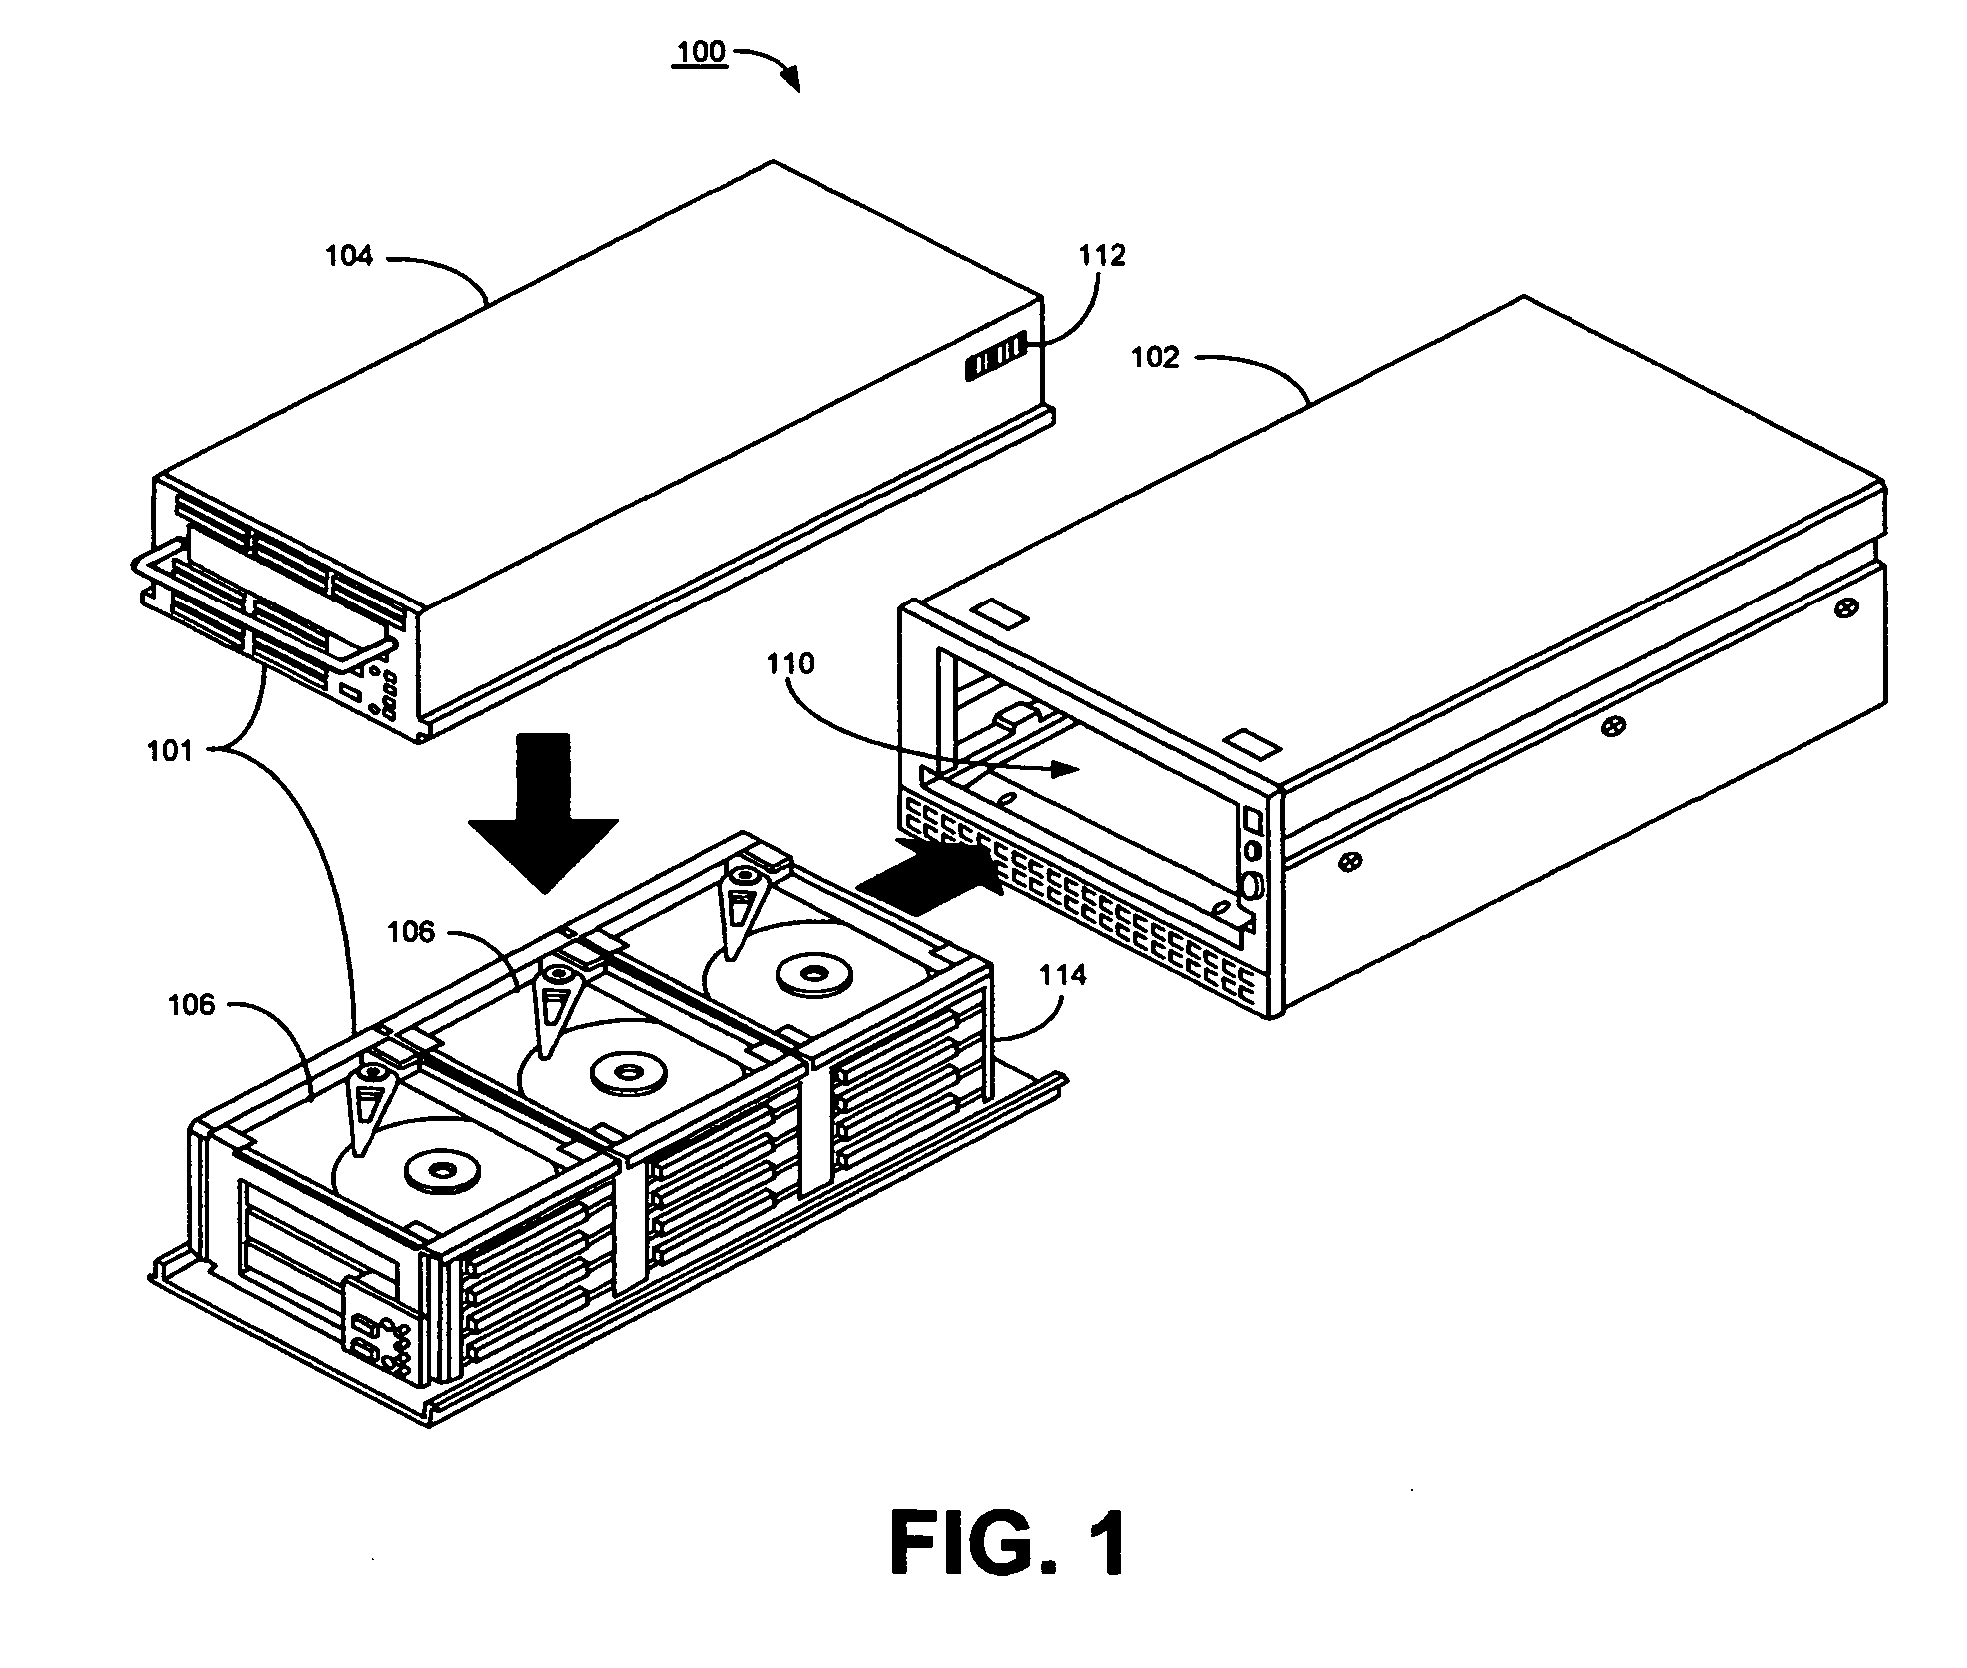 Spring based continuity alignment apparatus and method